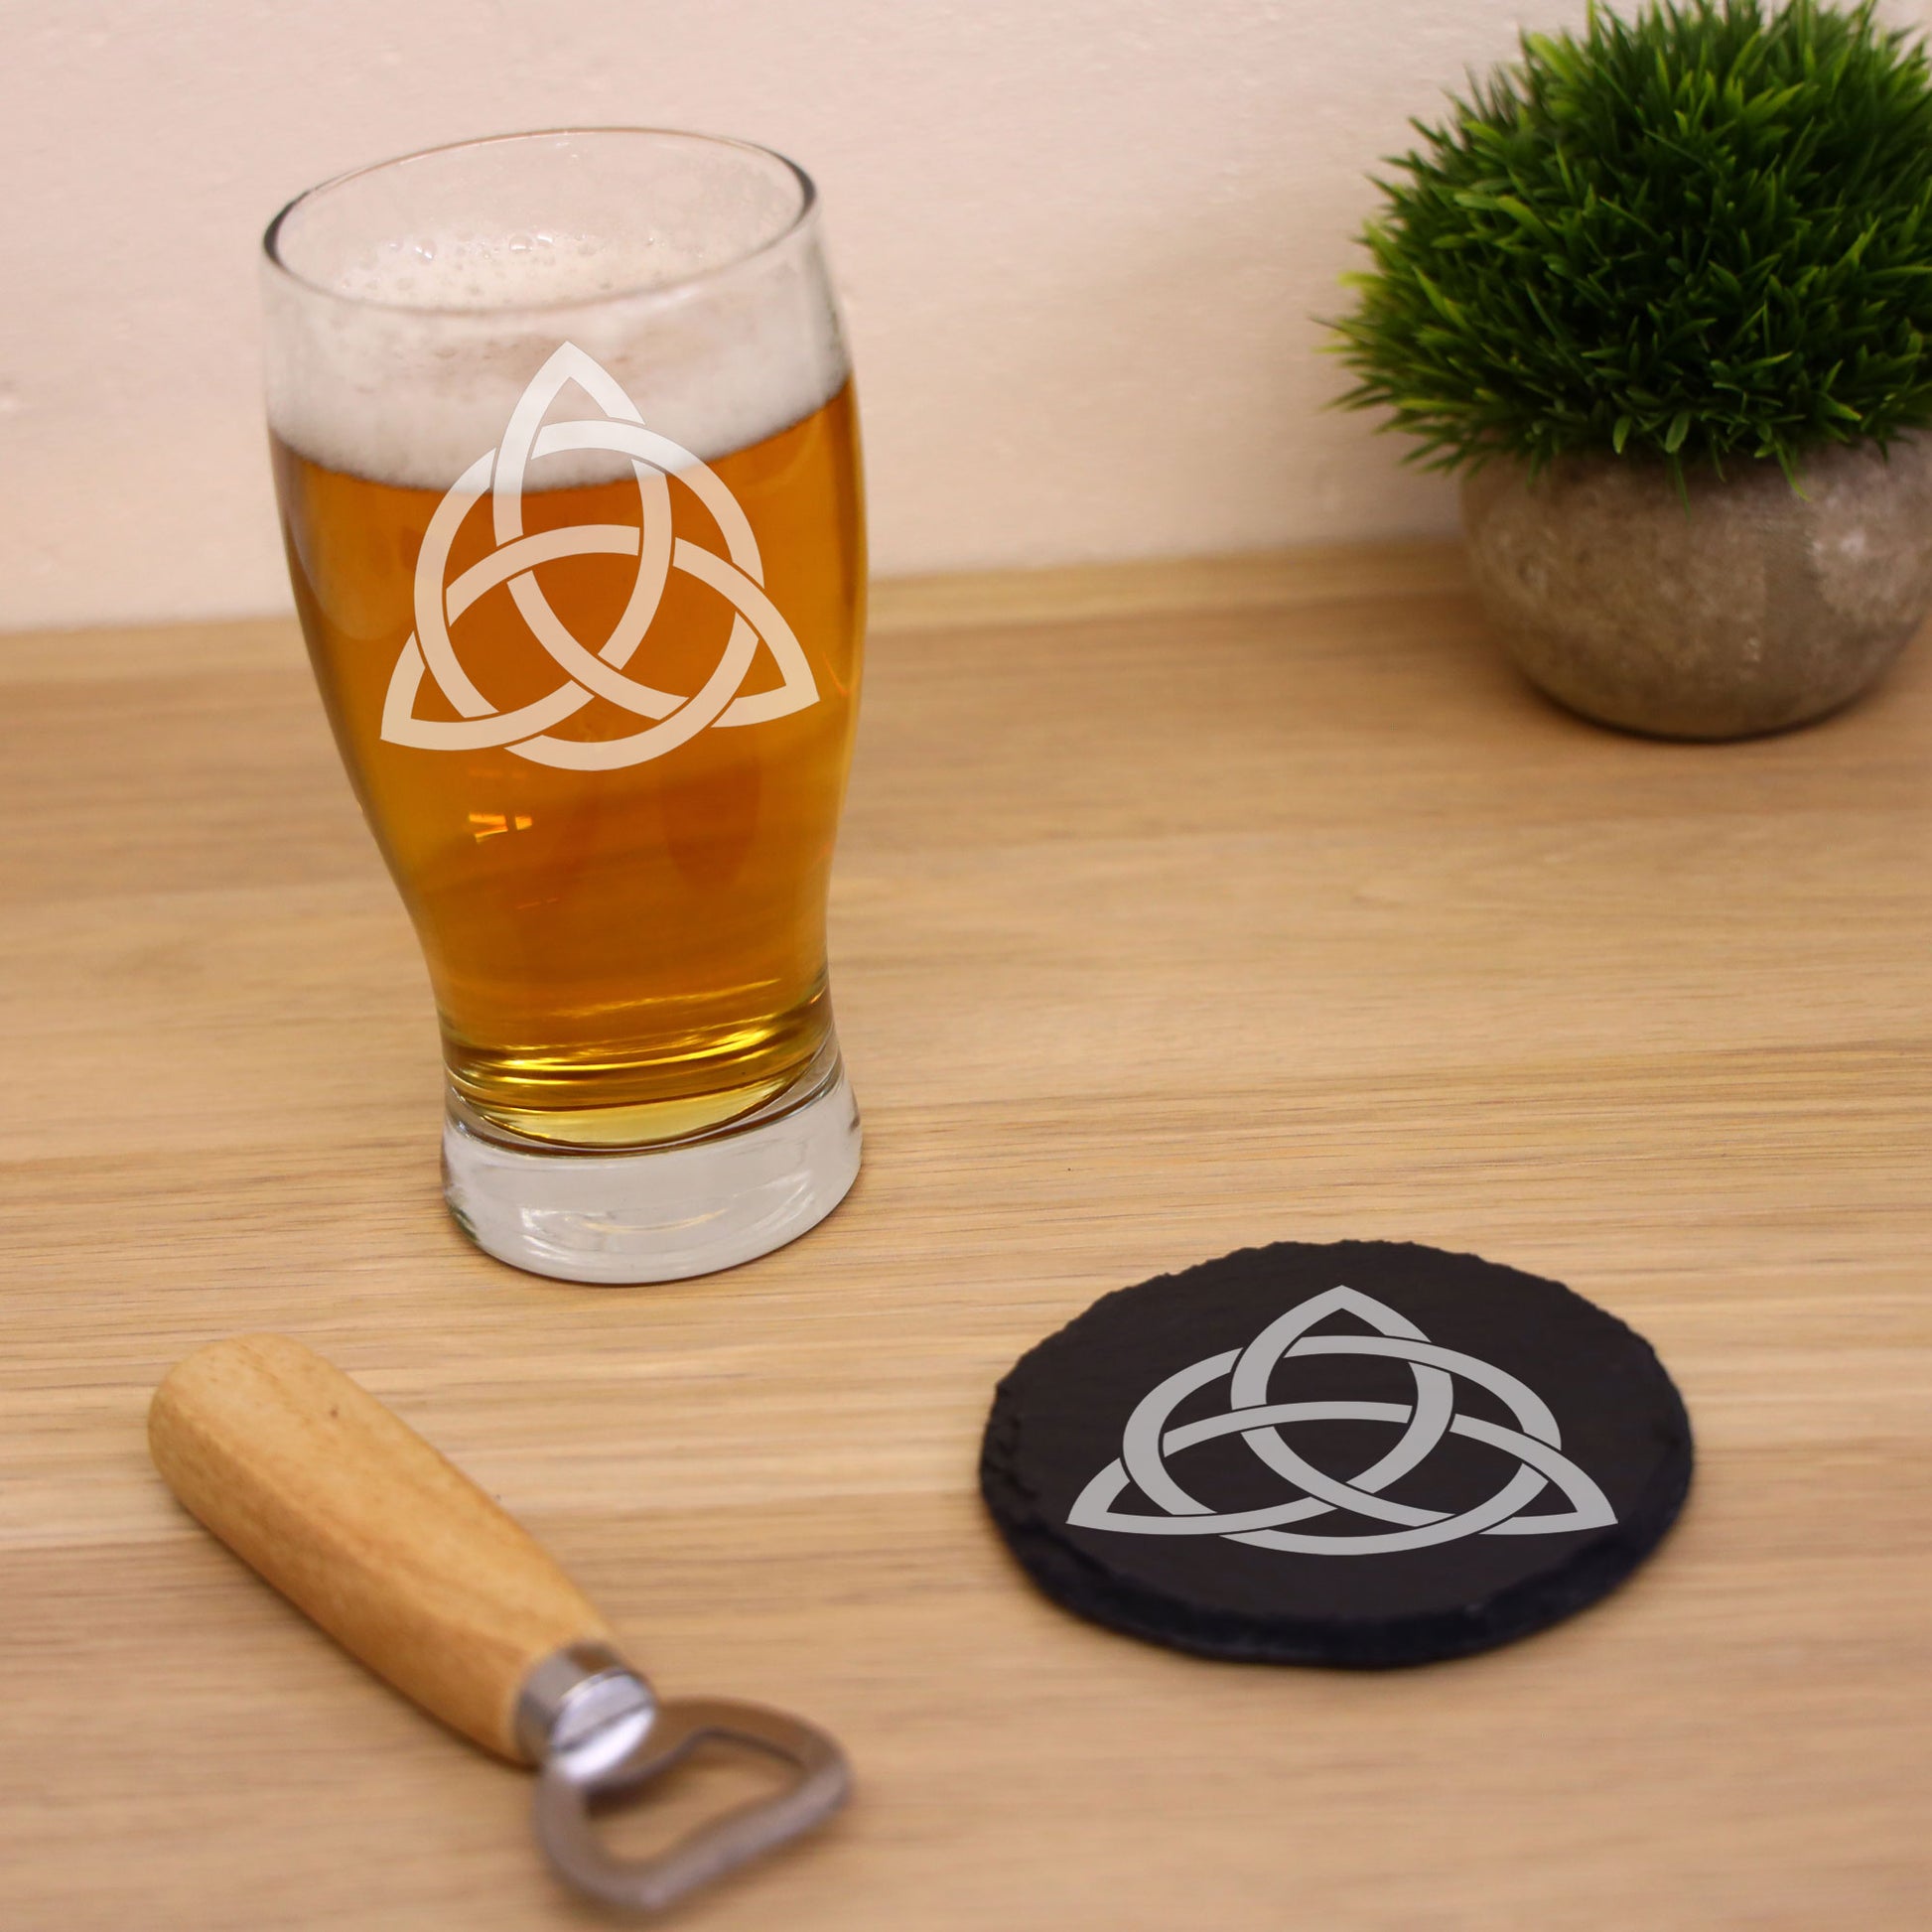 Celtic Knot Engraved Beer Pint Glass and/or Coaster Set  - Always Looking Good - Glass & Round Coaster Set  